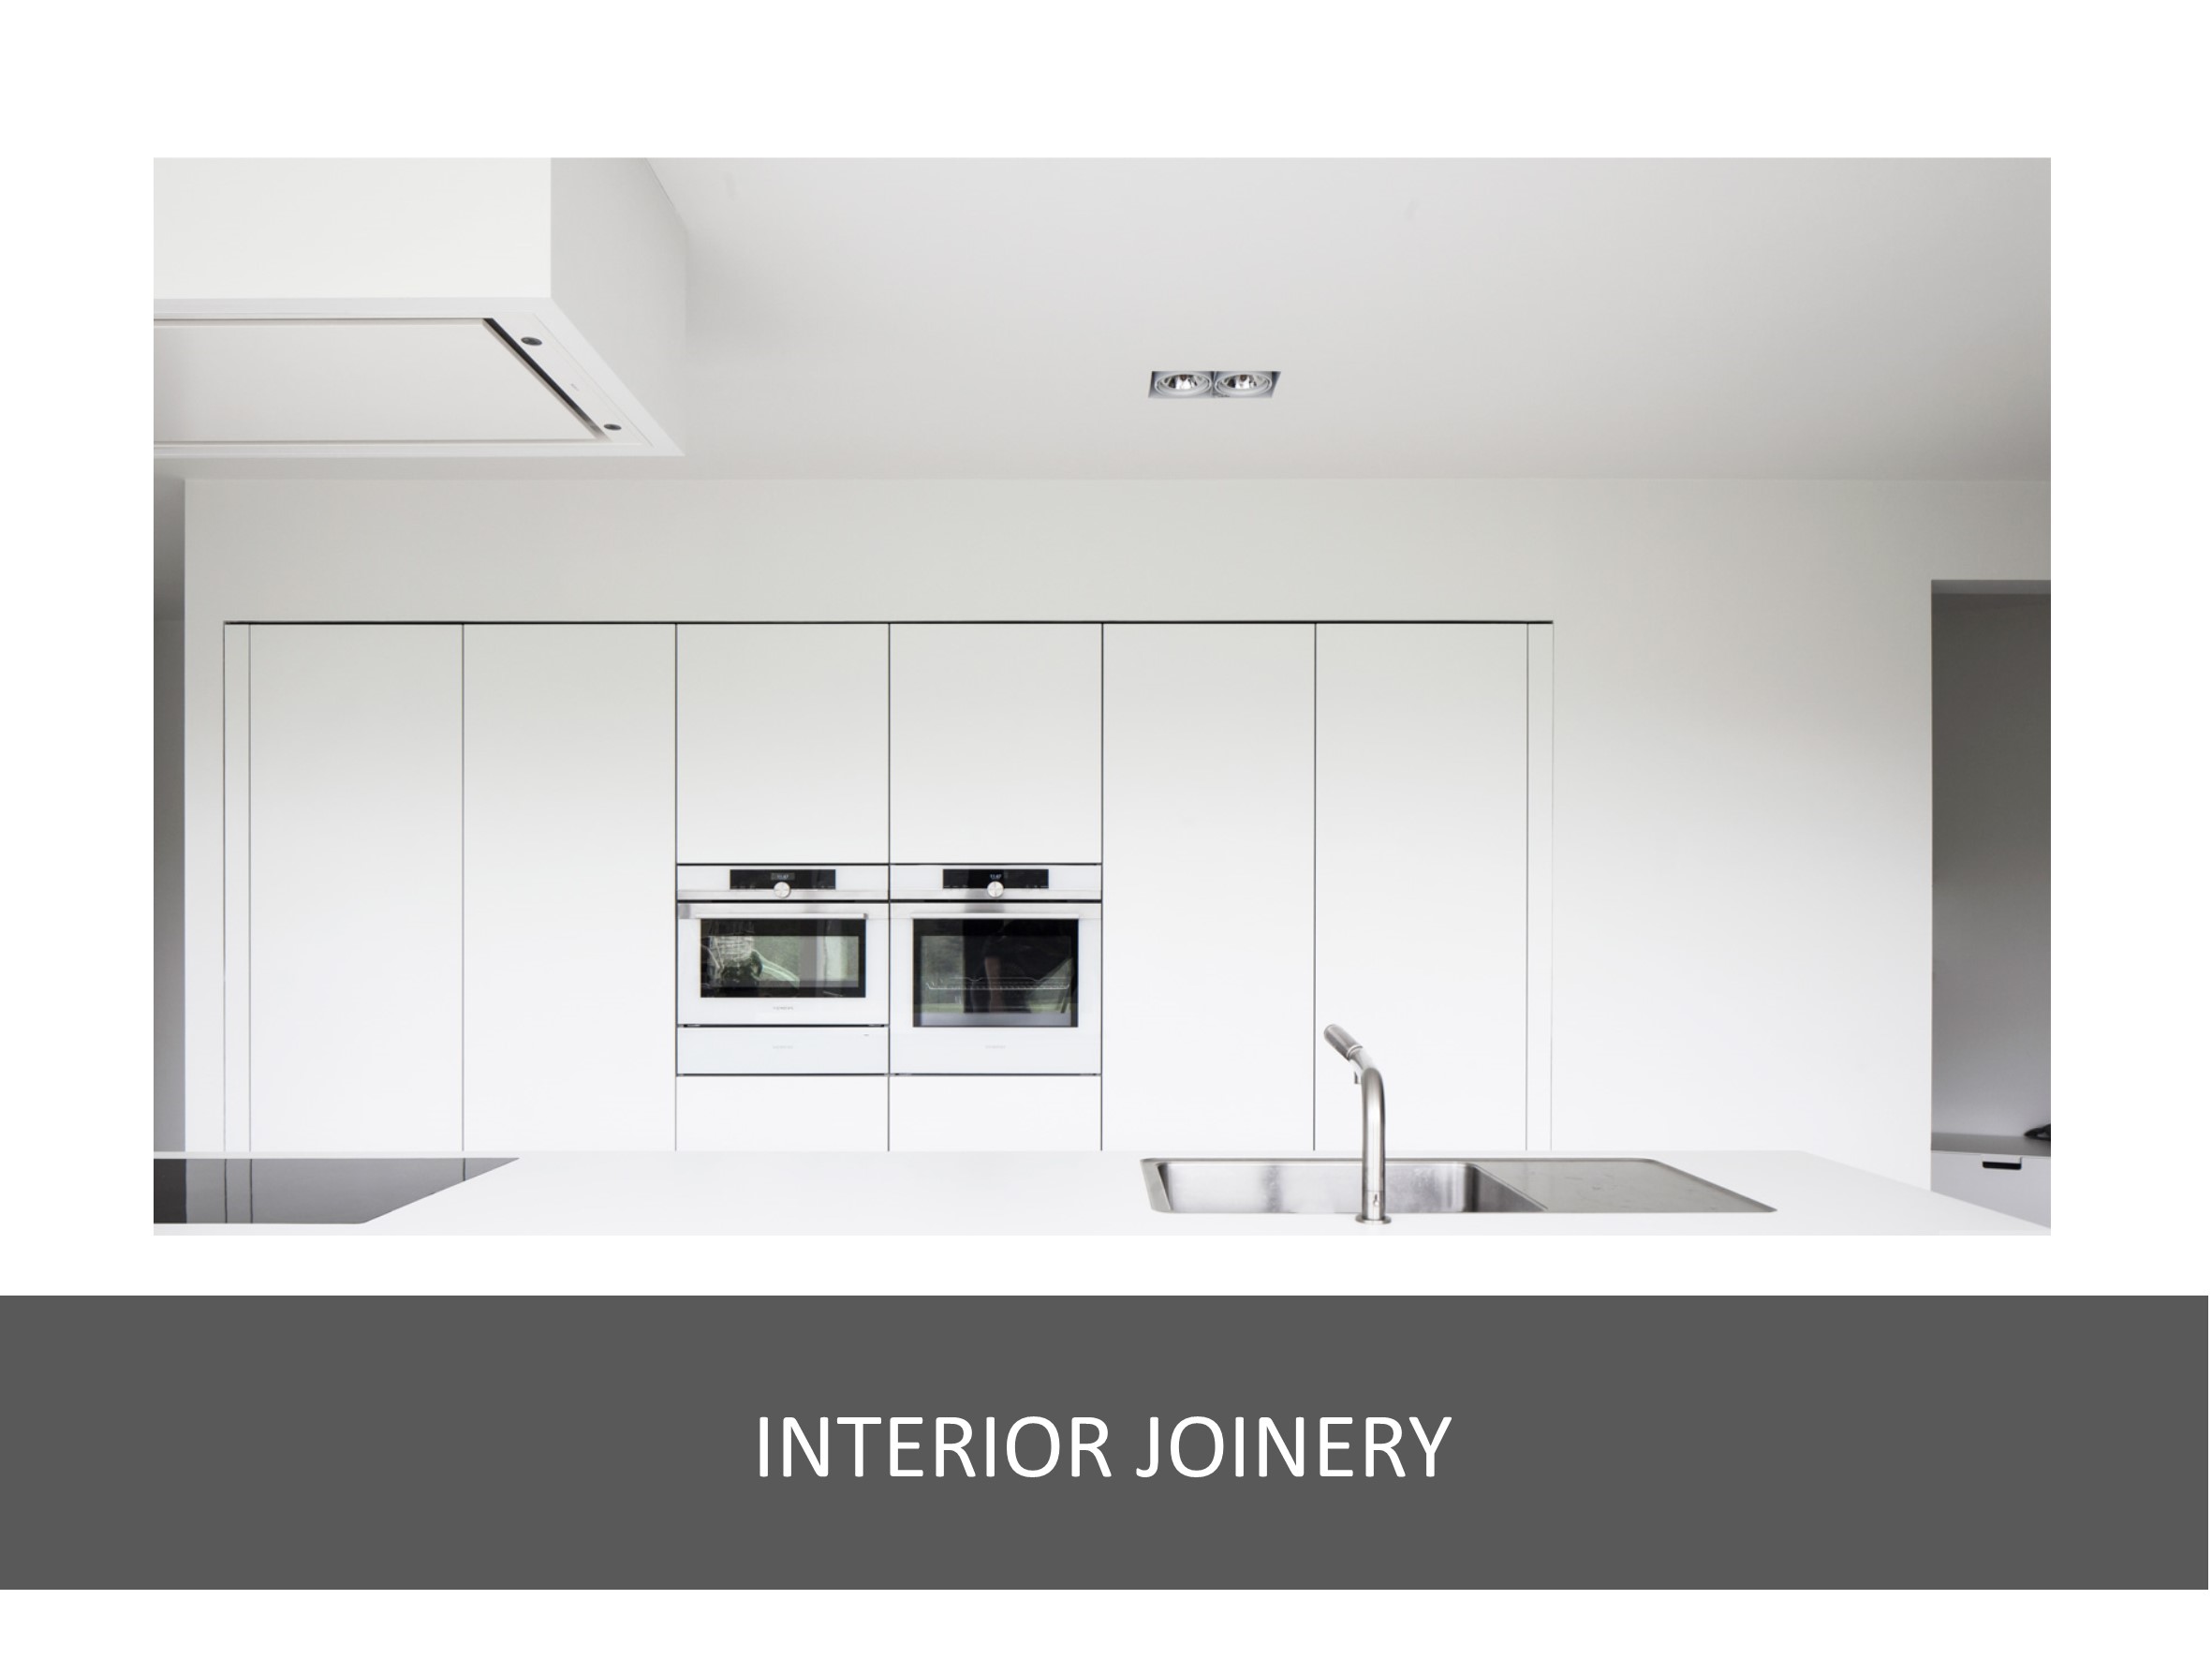 Interior joinery